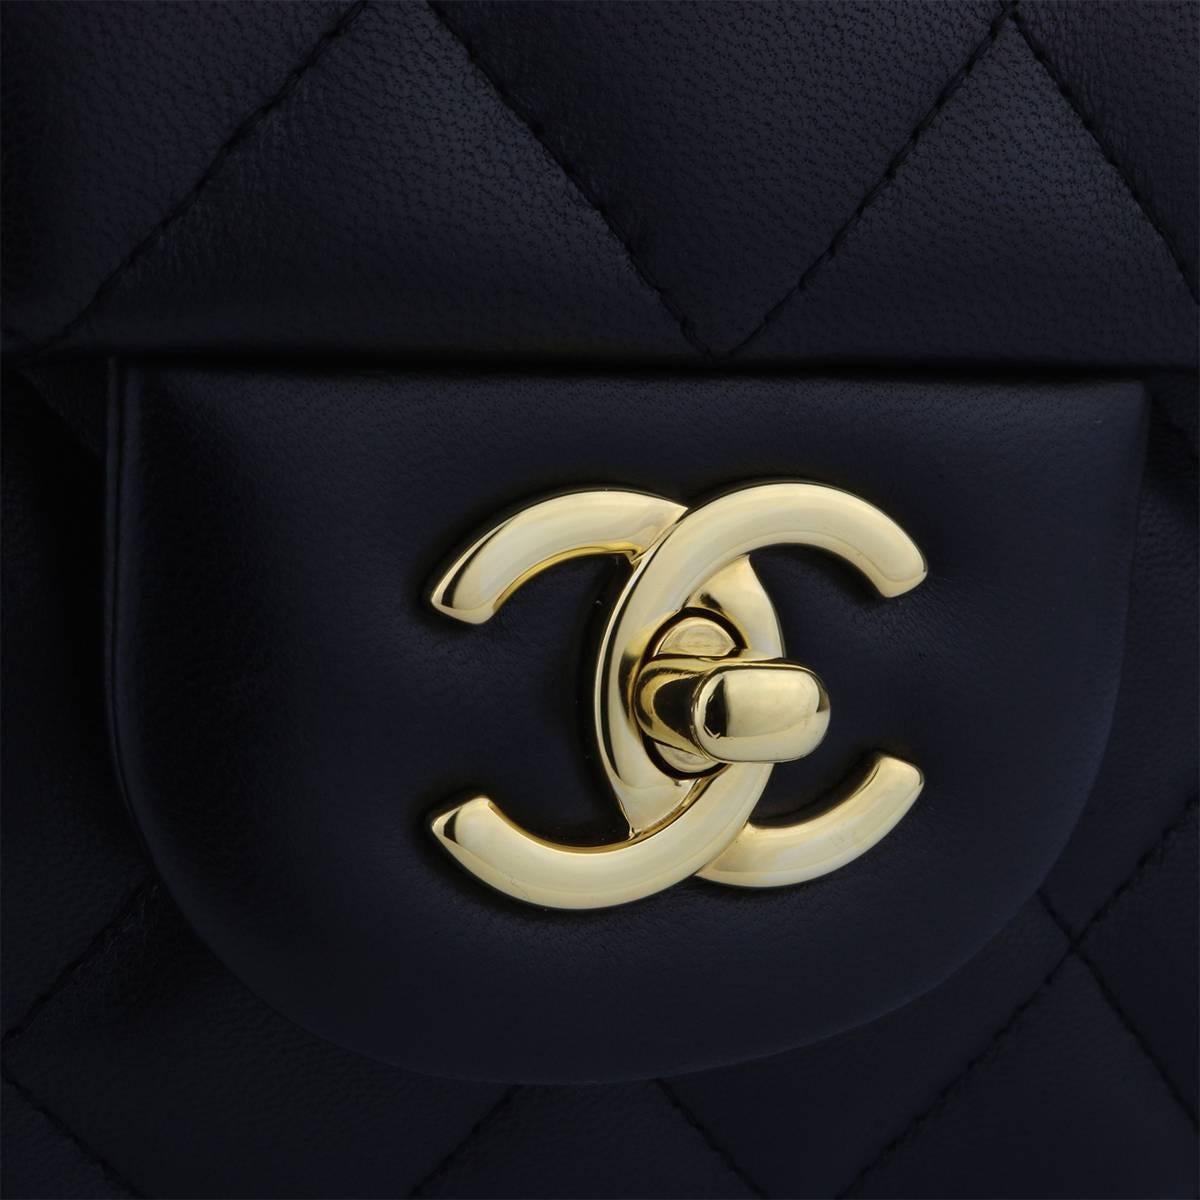 Authentic CHANEL Classic Jumbo Double Flap Black Lambskin with Gold Hardware 2015.

This stunning bag is in a mint condition, the bag still holds its original shape, and the hardware is still very shiny. Leather smells fresh as if new.

Exterior